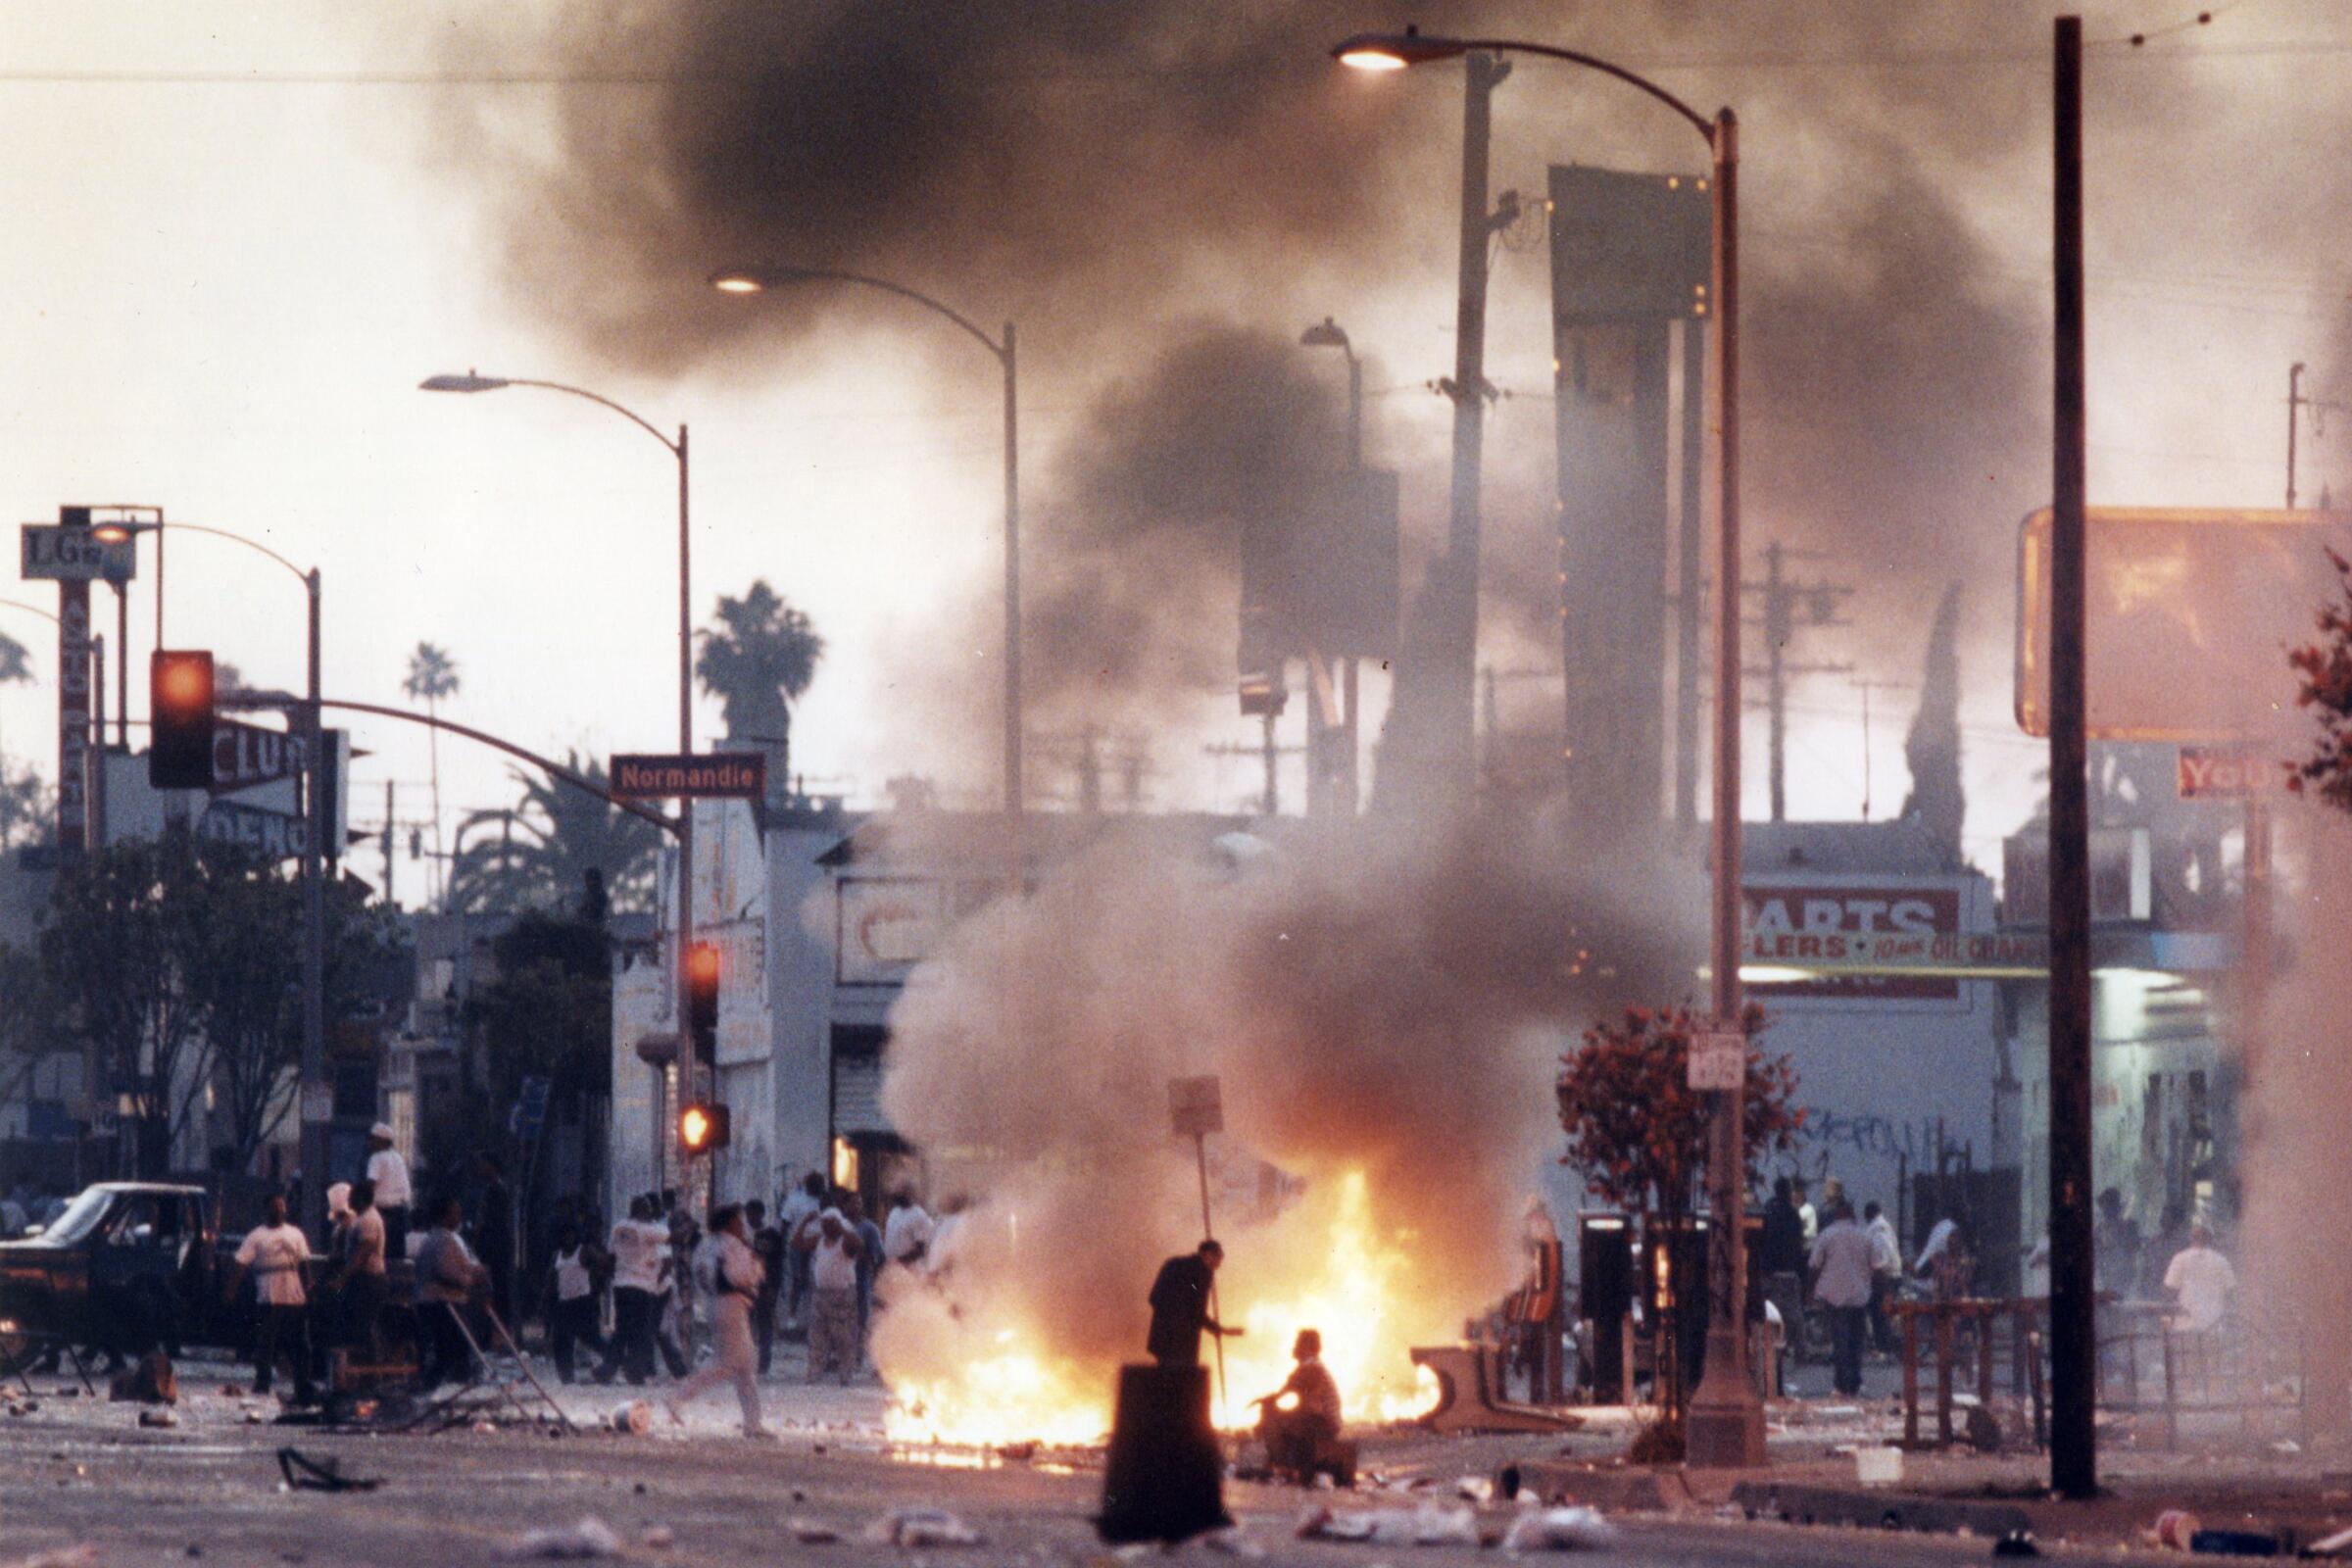 A fire burns on a corner during the first day the L.A. riots on April 29, 1992.